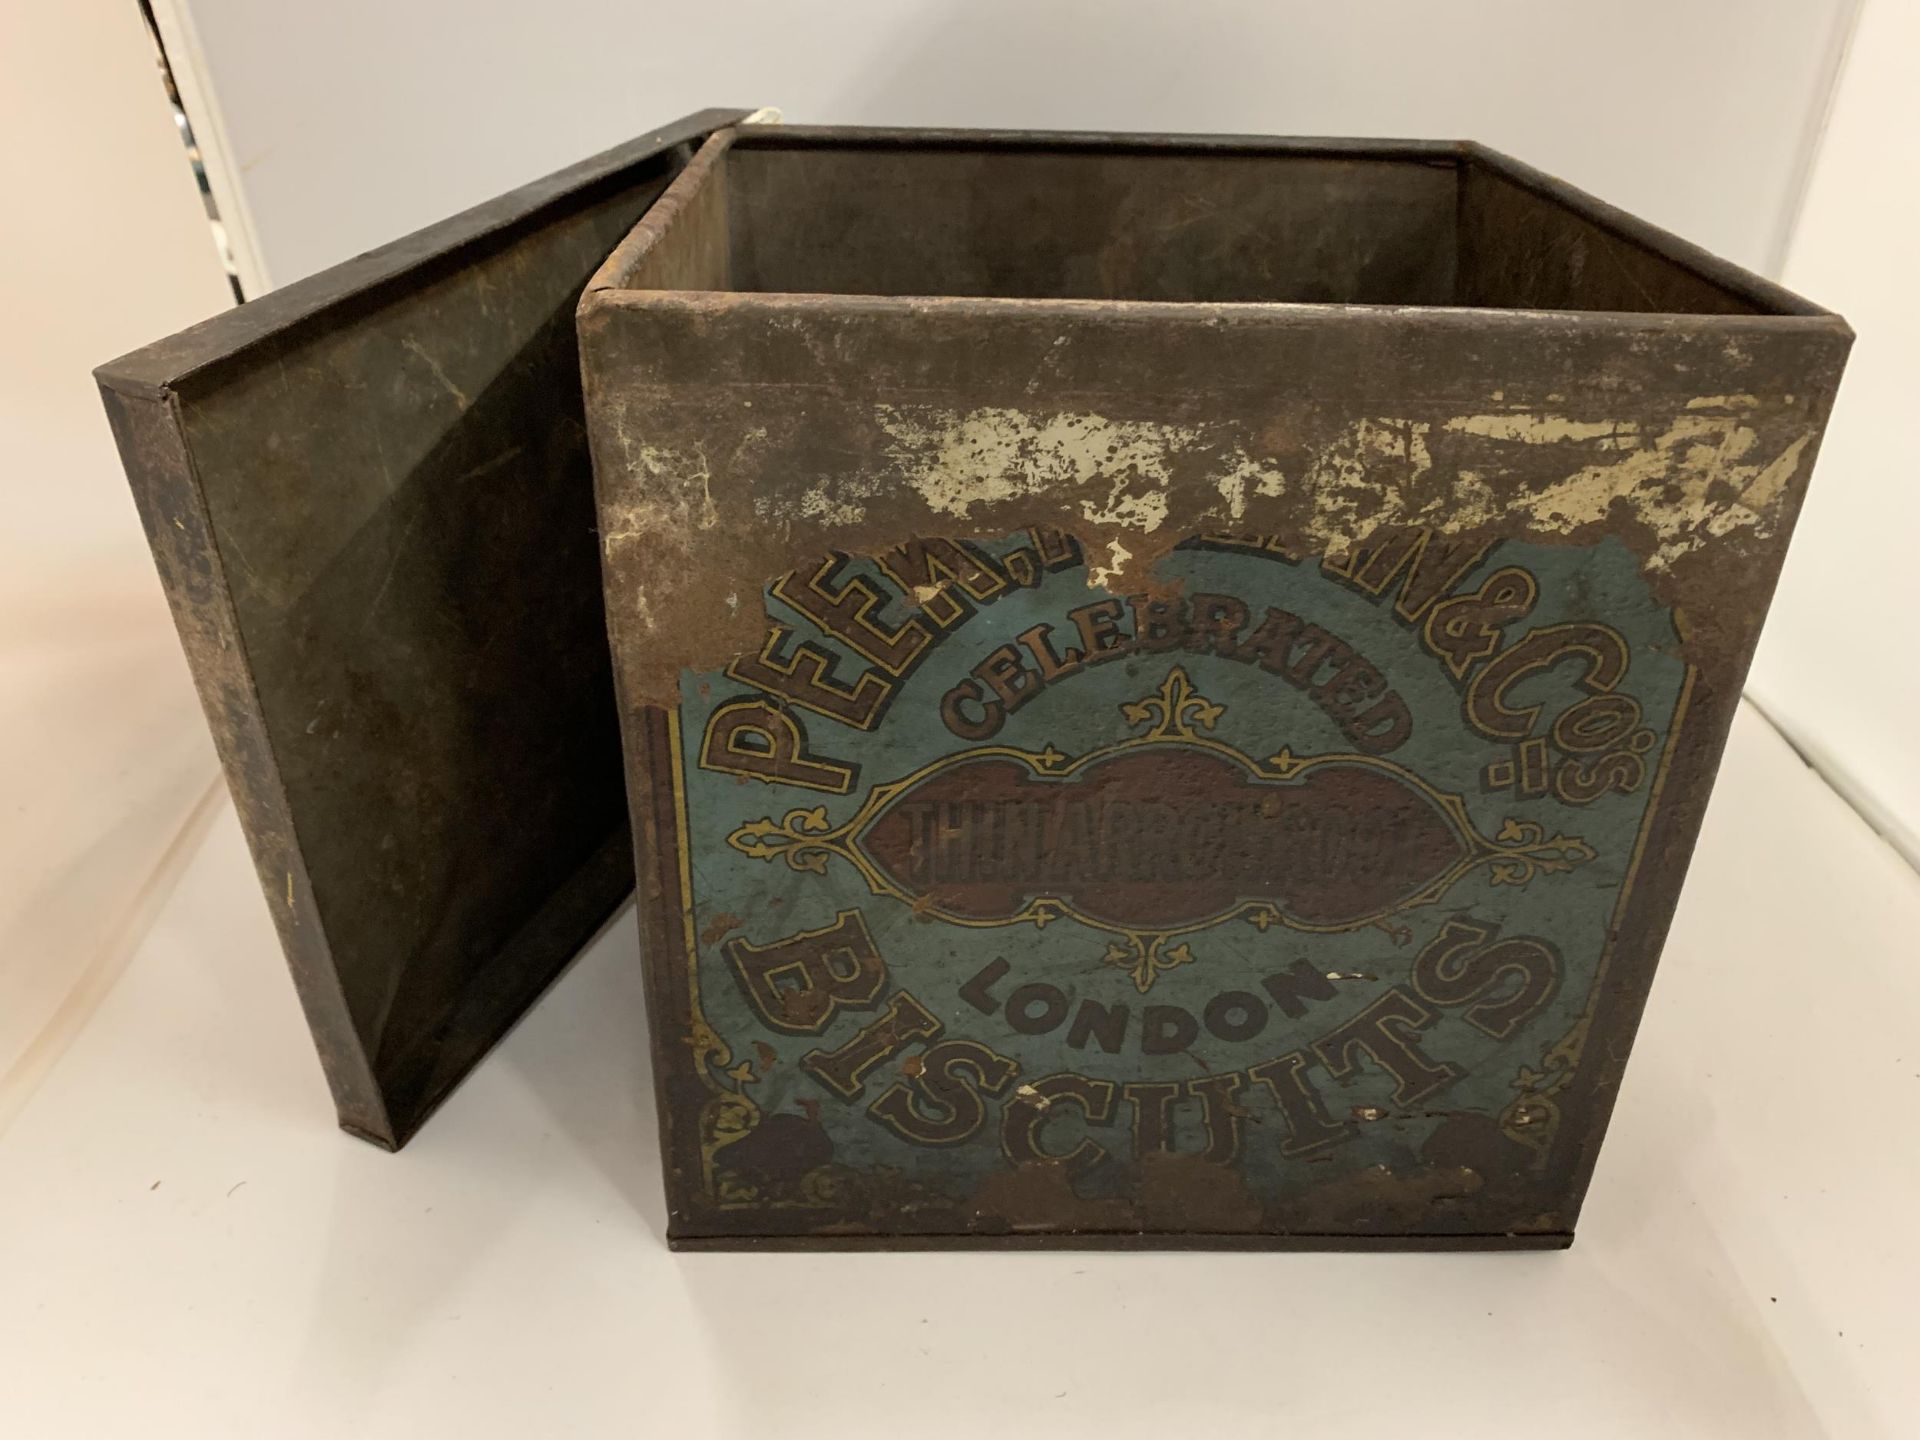 A LARGE VINTAGE BISCUIT TIN ADVERTISING ARROWROOT BISCUITS, HEIGHT 26CM, WIDTH 23CM, DEPTH 23CM - Image 3 of 3